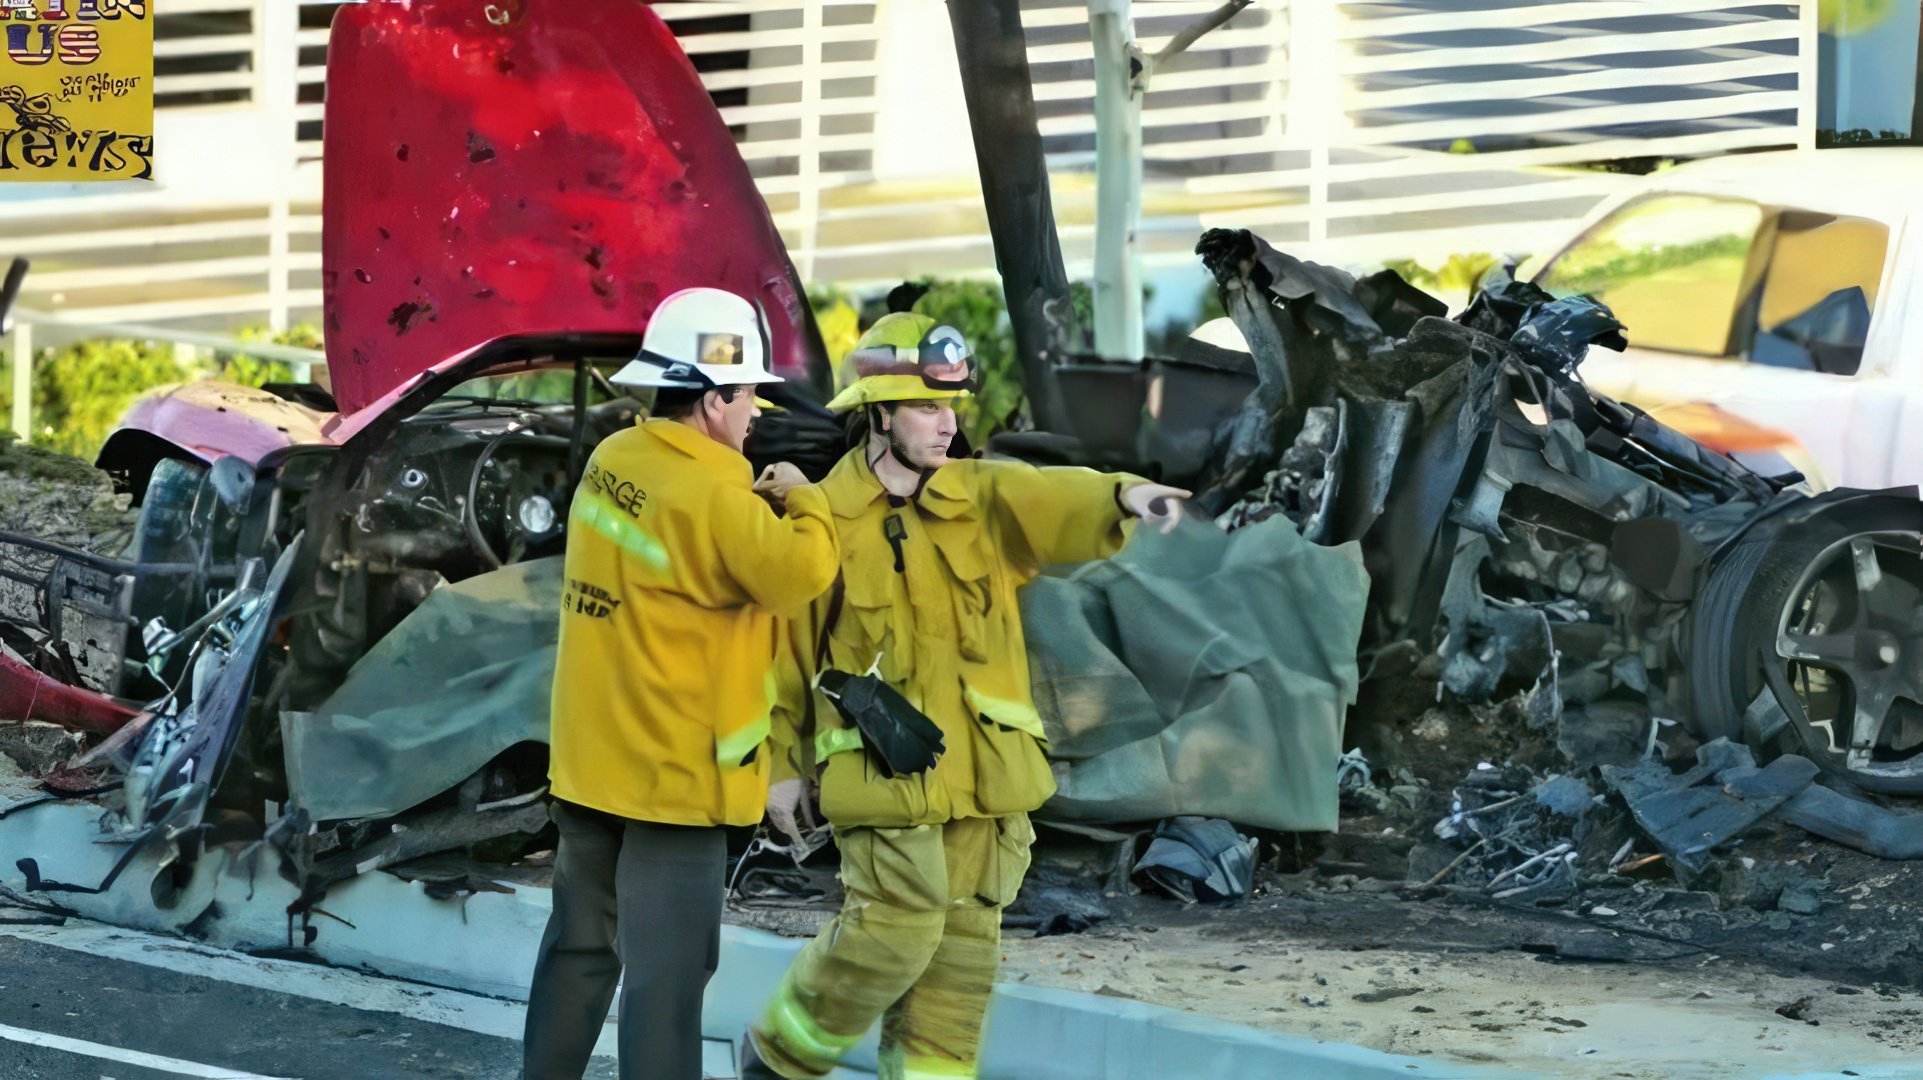 Photos from the scene of Paul Walker's death